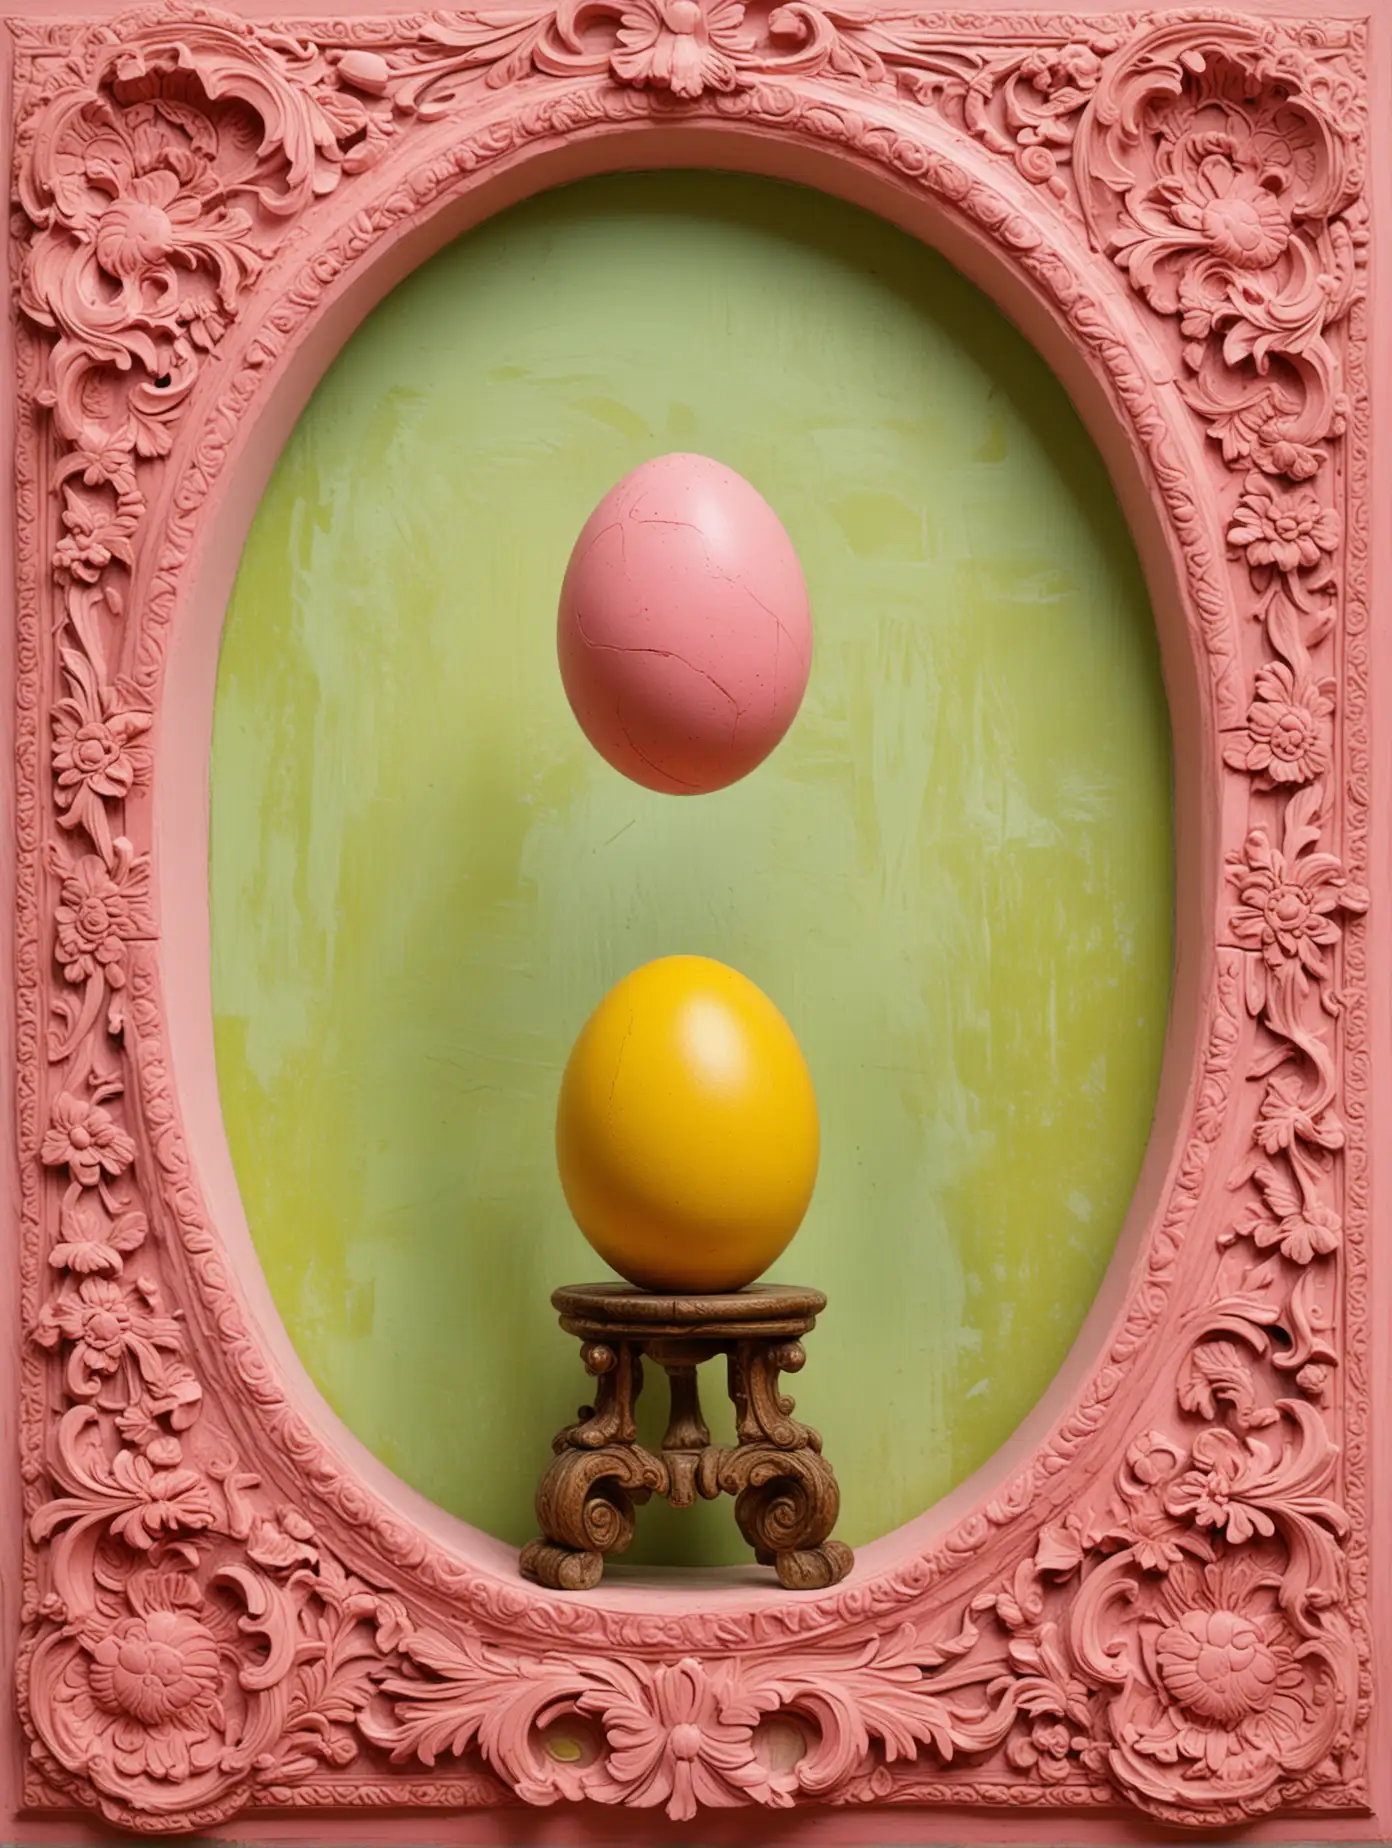 Egg Balancing Art in Fauvist Style with Baroque Carved Background